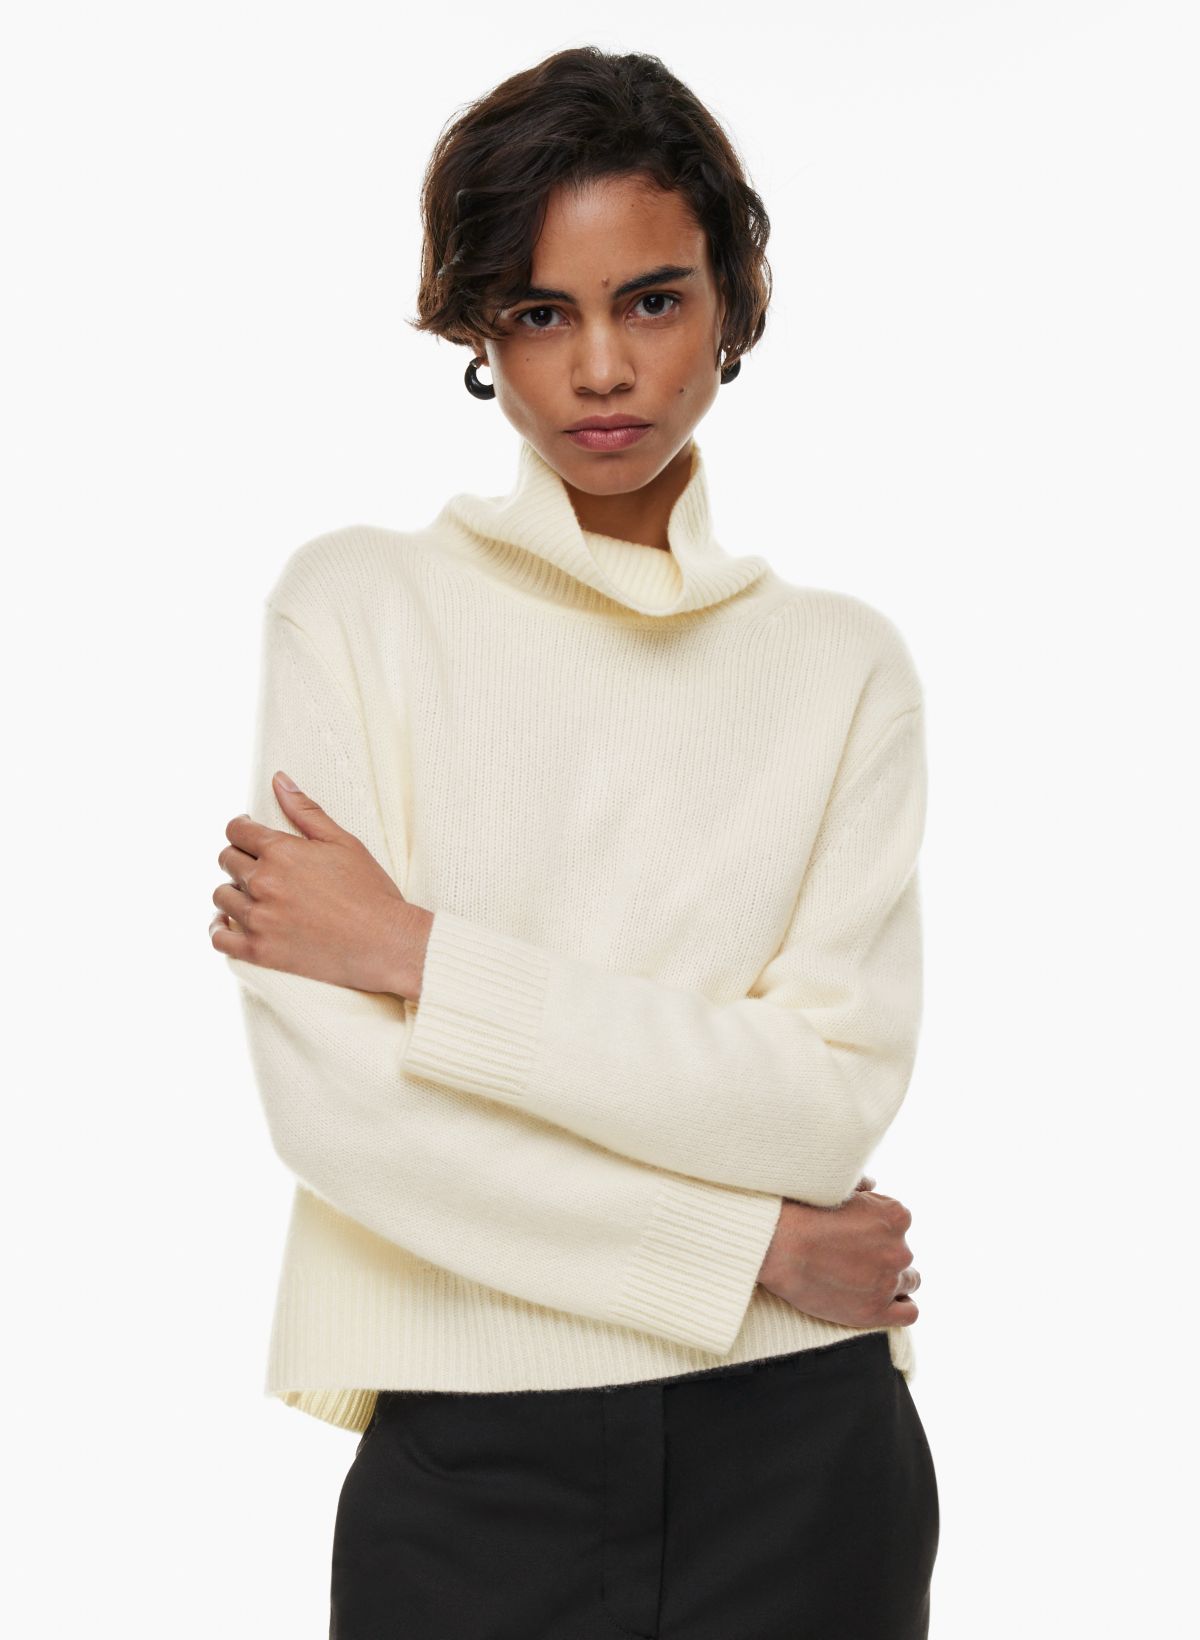 Women Cashmere Sweaters and Pullovers Winter Turtleneck Thicken Solid Color Soft Loose Jumper